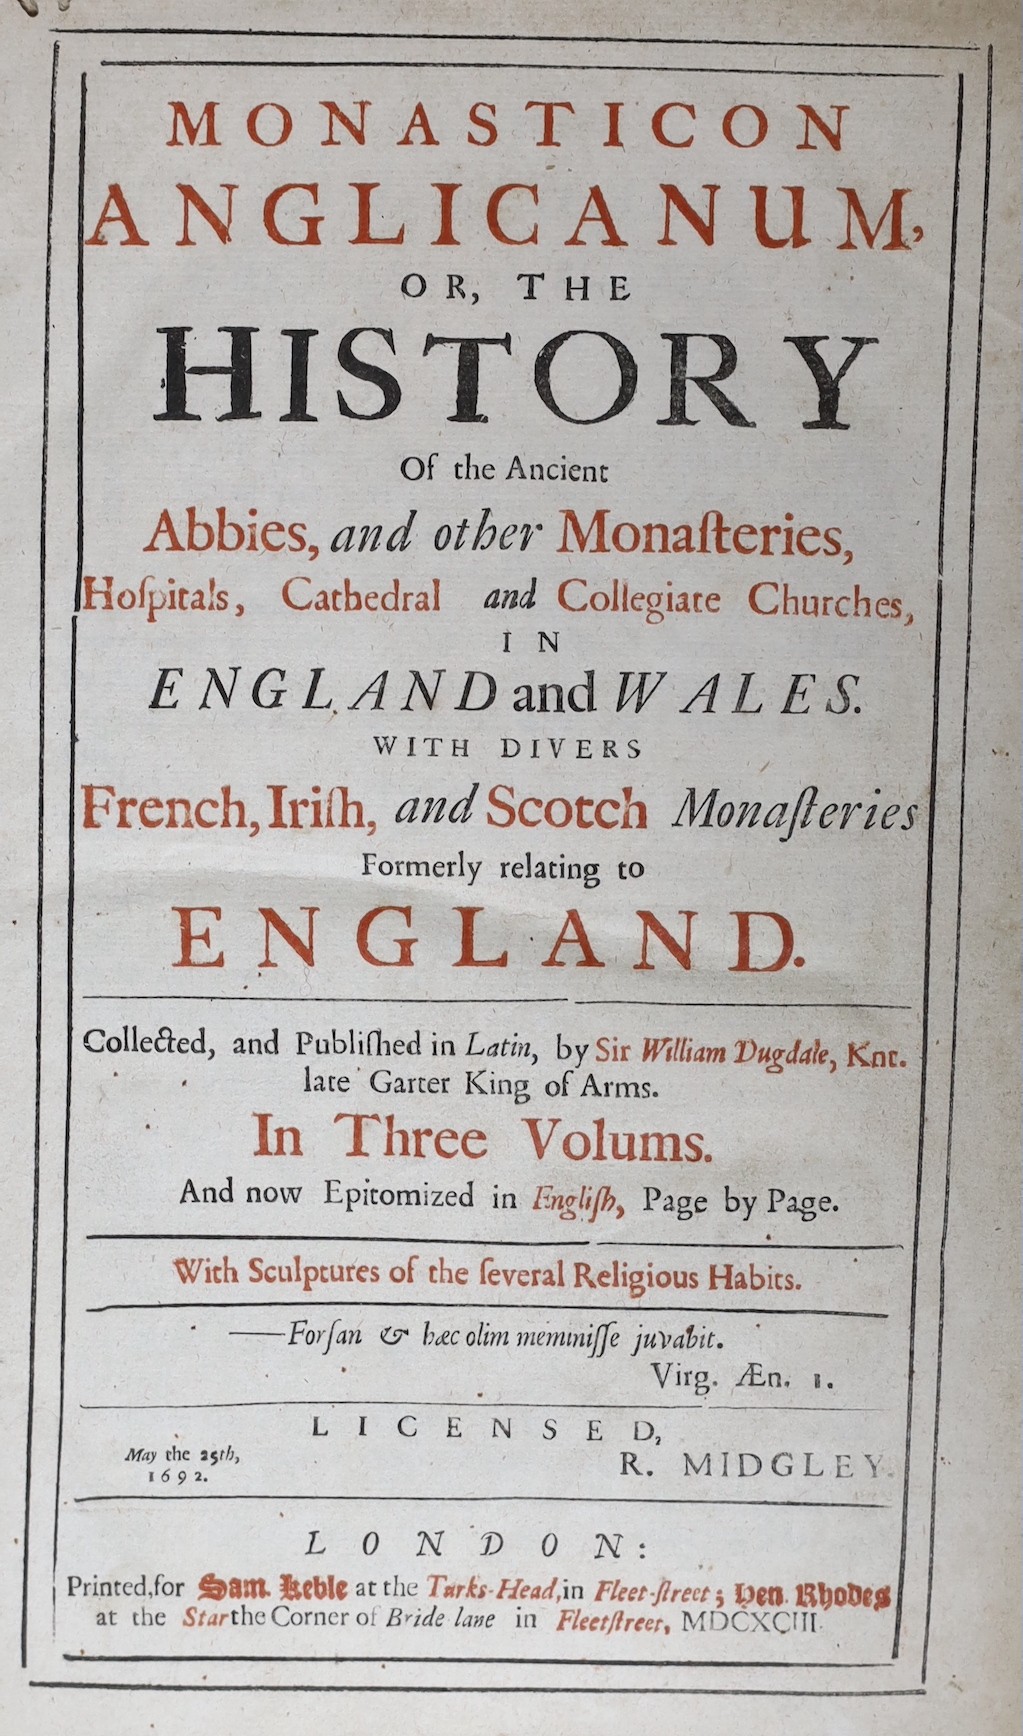 Dugdale, William - Monasticon Anglicanum, or, the History of the Abbies, and other Monastries, Hospitals, Cathedral and Collegiate Chuches in England and Wales., 3 vols in one, with 14 (of 15) full page engravings, pp. 1